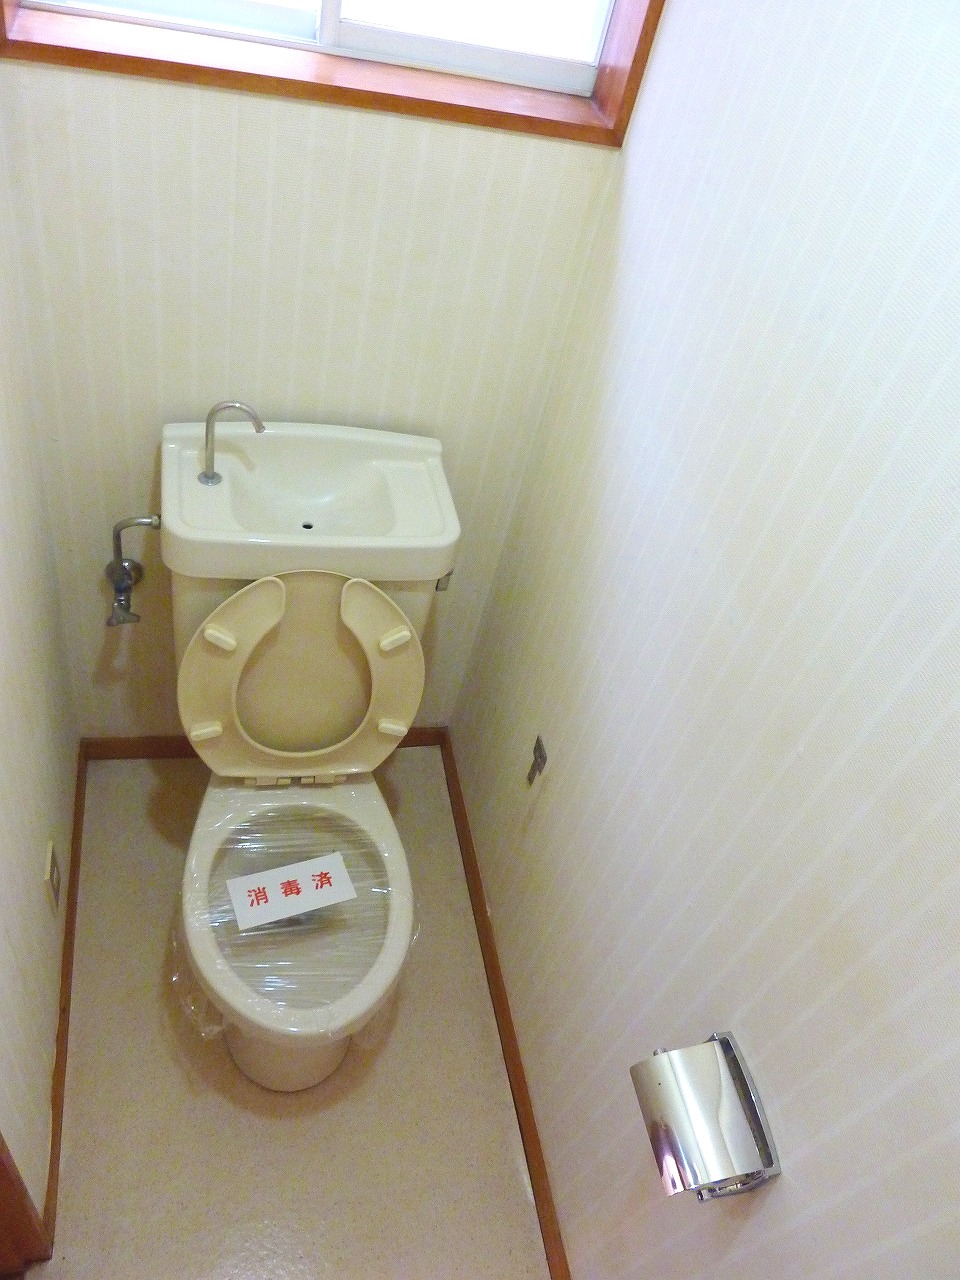 Toilet. It will be Western-style flush toilet.